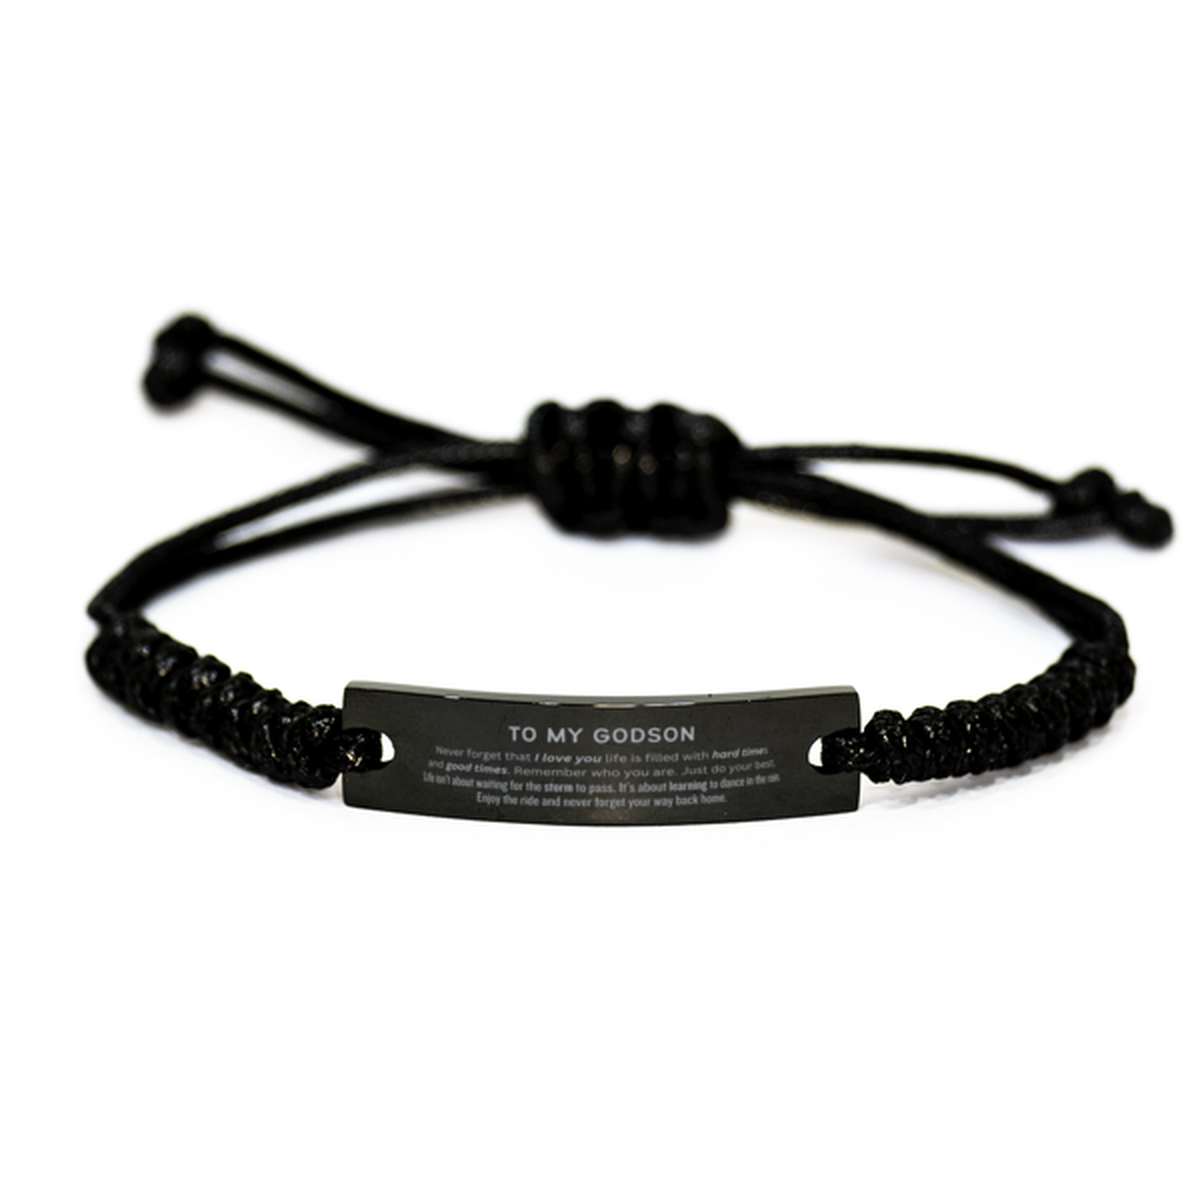 Christmas Godson Black Rope Bracelet Gifts, To My Godson Birthday Thank You Gifts For Godson, Graduation Unique Gifts For Godson To My Godson Never forget that I love you life is filled with hard times and good times. Remember who you are. Just do your be